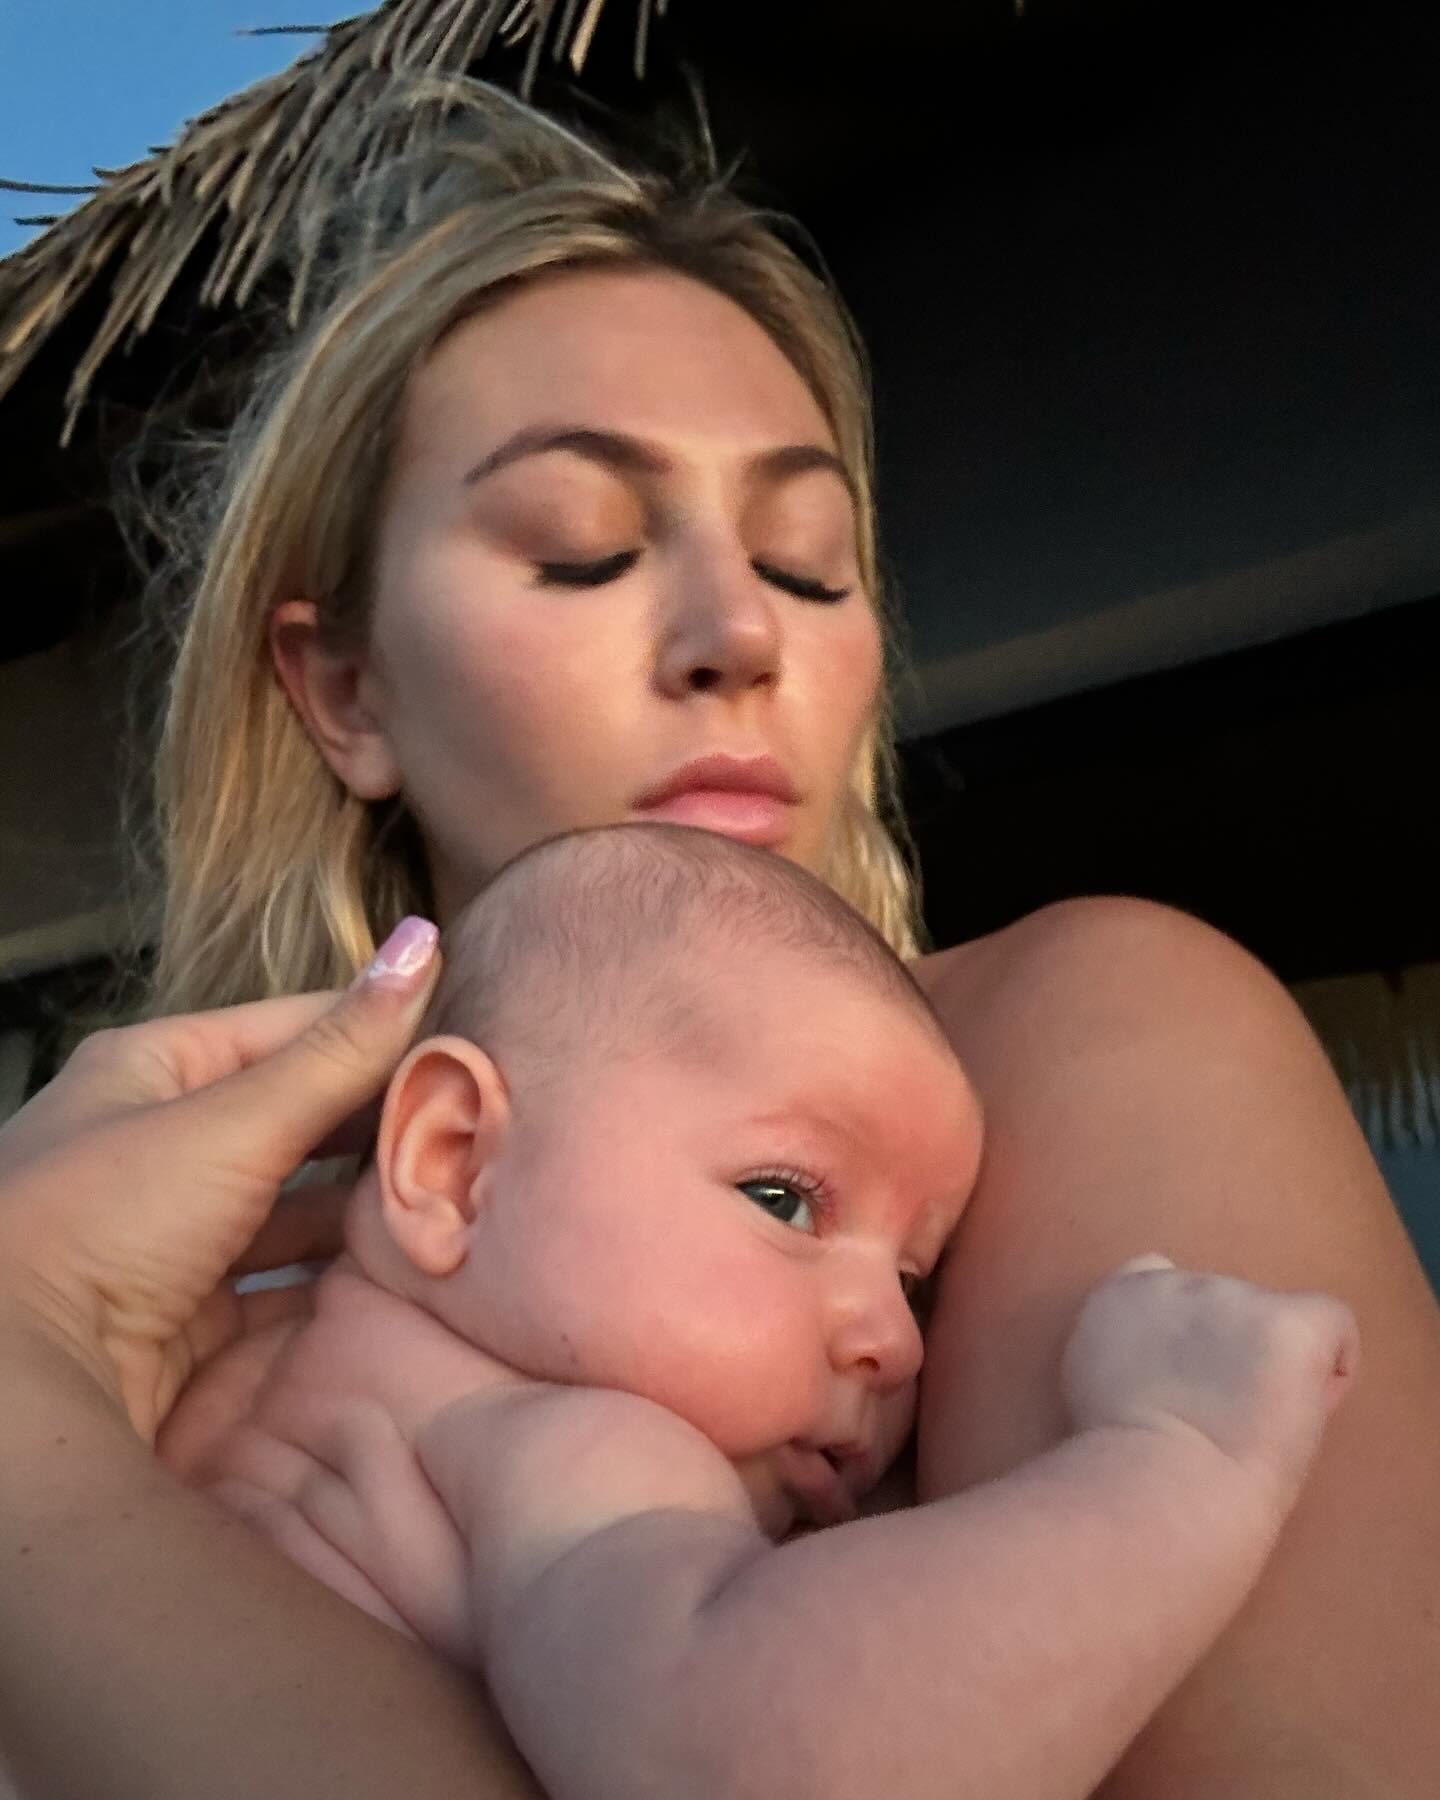 Ocean & I woke up after her 5am feed and watched our first ever sunrise together… she’s becoming so alert & aware it’s insane. My heart couldn’t be more full. 🥹🌞🌅🫶🏼

She makes me feel so whole and complete she’s everything I’ve ever wanted and when I hold her nothing else matters 🤍

The biggest gift on earth is being your mama 🫶🏼